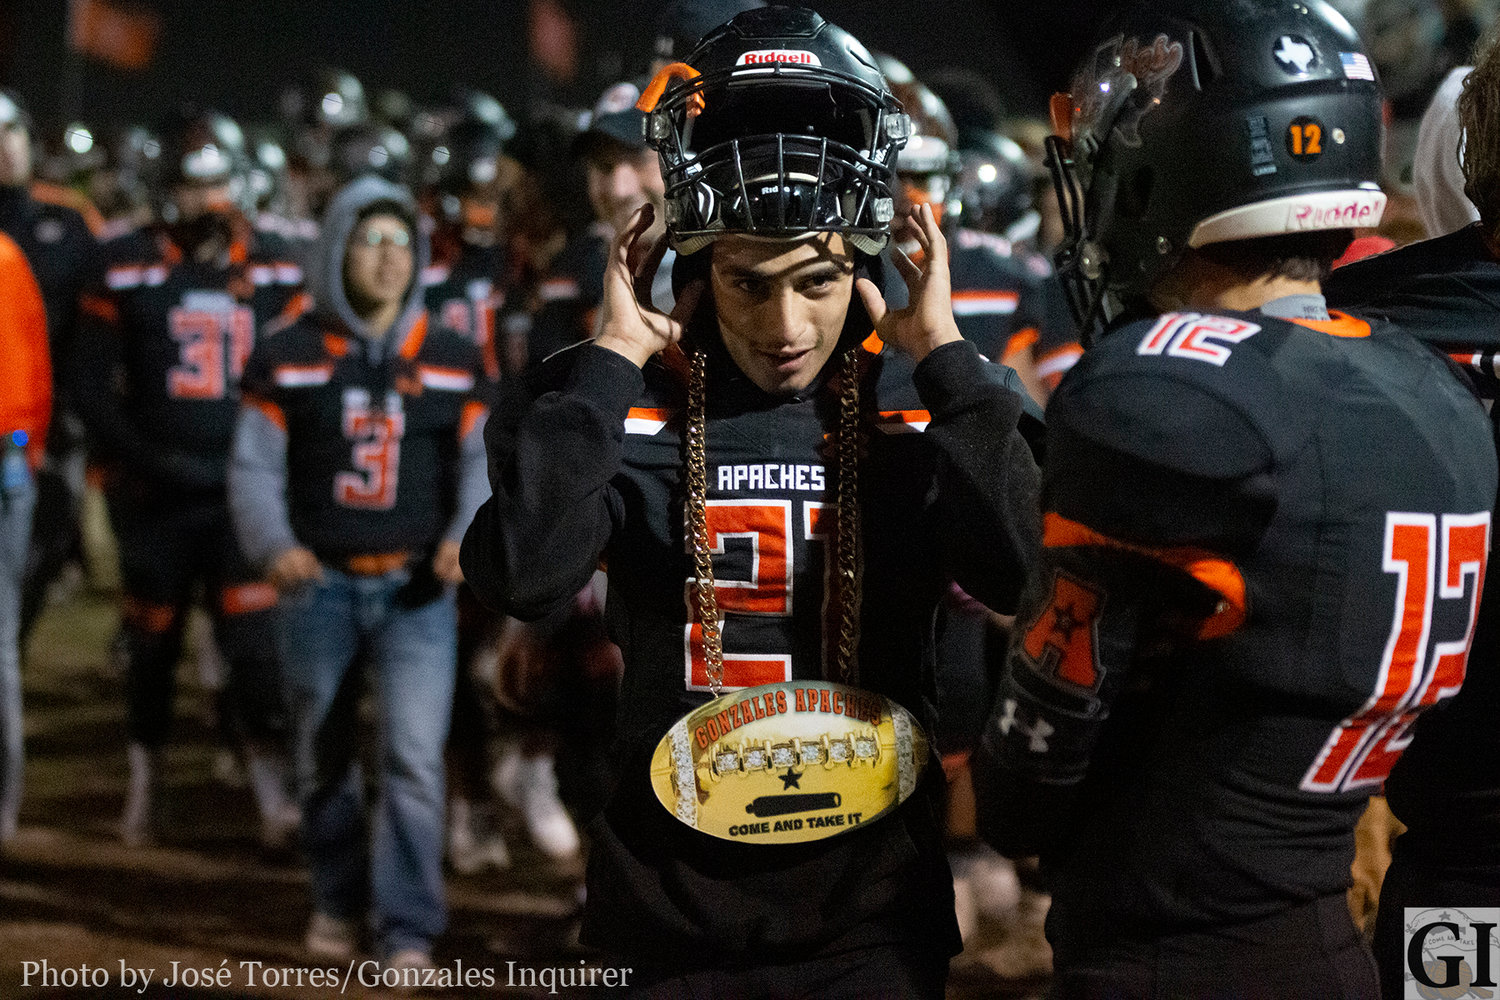 The turnover chain had to be passed around a bit as the Apaches defense played tough against the Boerne Greyhounds. Domingo Garcia (21) let's his chain hang low in Gonzales' 35-28 win.